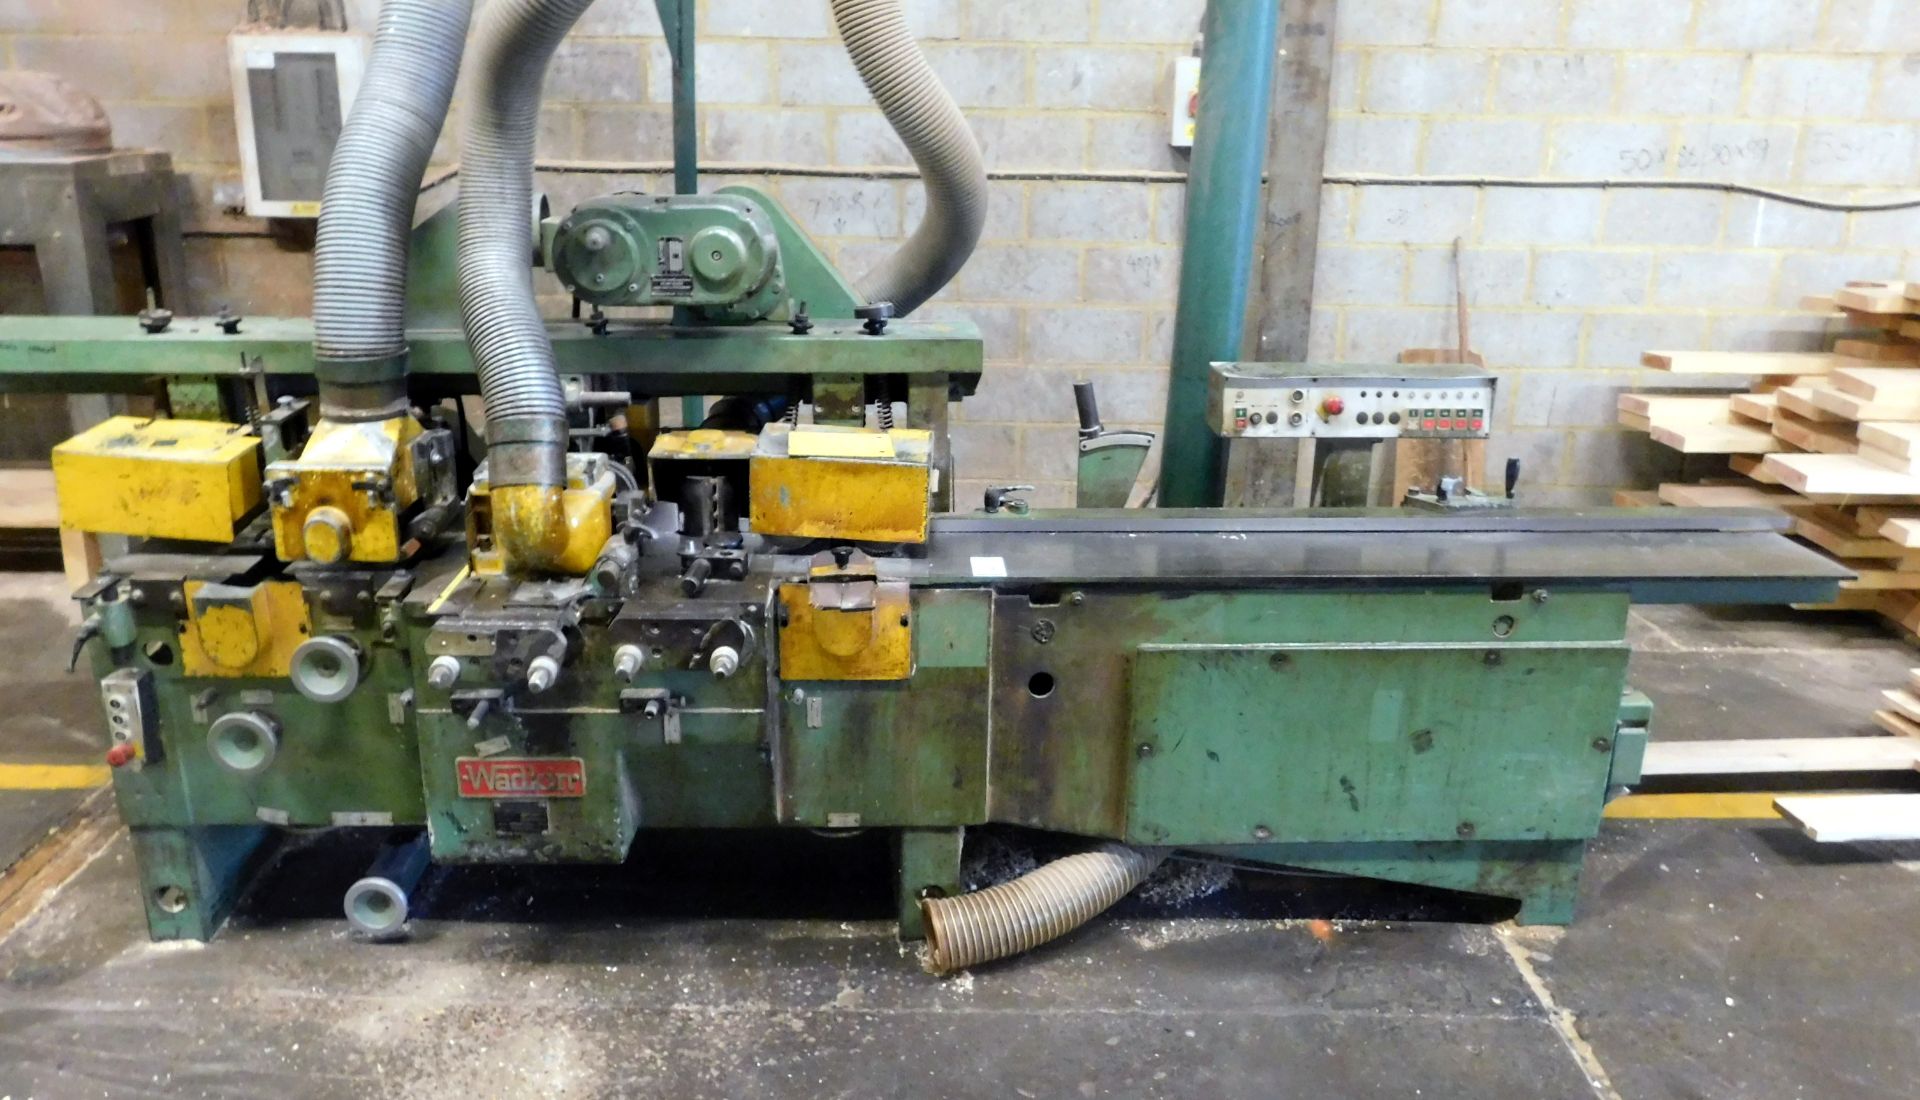 Wadkin GA Multi-Head Moulder, serial number GA5176/3730 with 2 Twin Bag Dust Extraction Units (